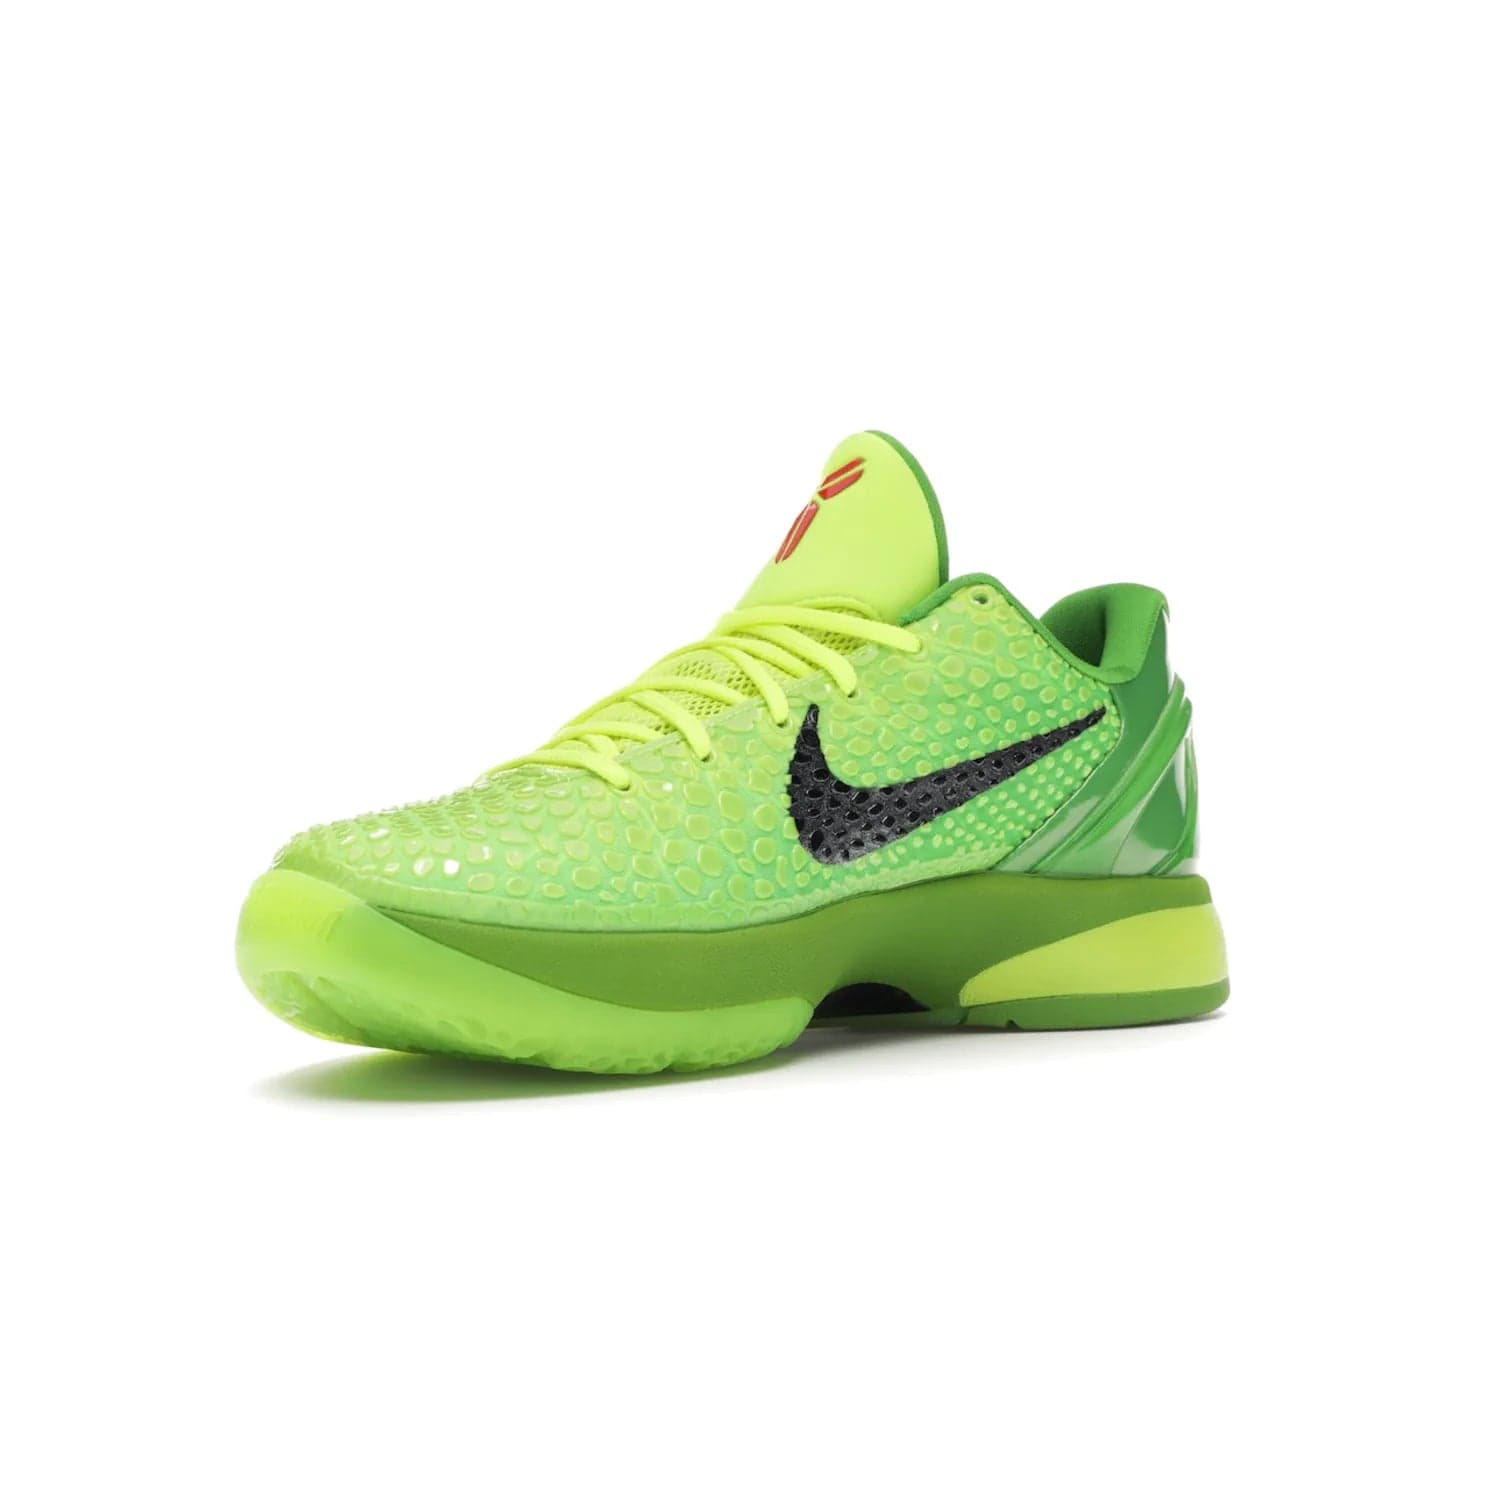 Nike Kobe 6 Protro Grinch (2020) - Image 15 - Only at www.BallersClubKickz.com - #
The Nike Kobe 6 Protro Grinch updates the iconic 2011 design with modern tech like a Zoom Air cushioning system, scaled-down traction, and updated silhouette. Experience the textured Green Apple and Volt upper plus bright red and green accents for $180.